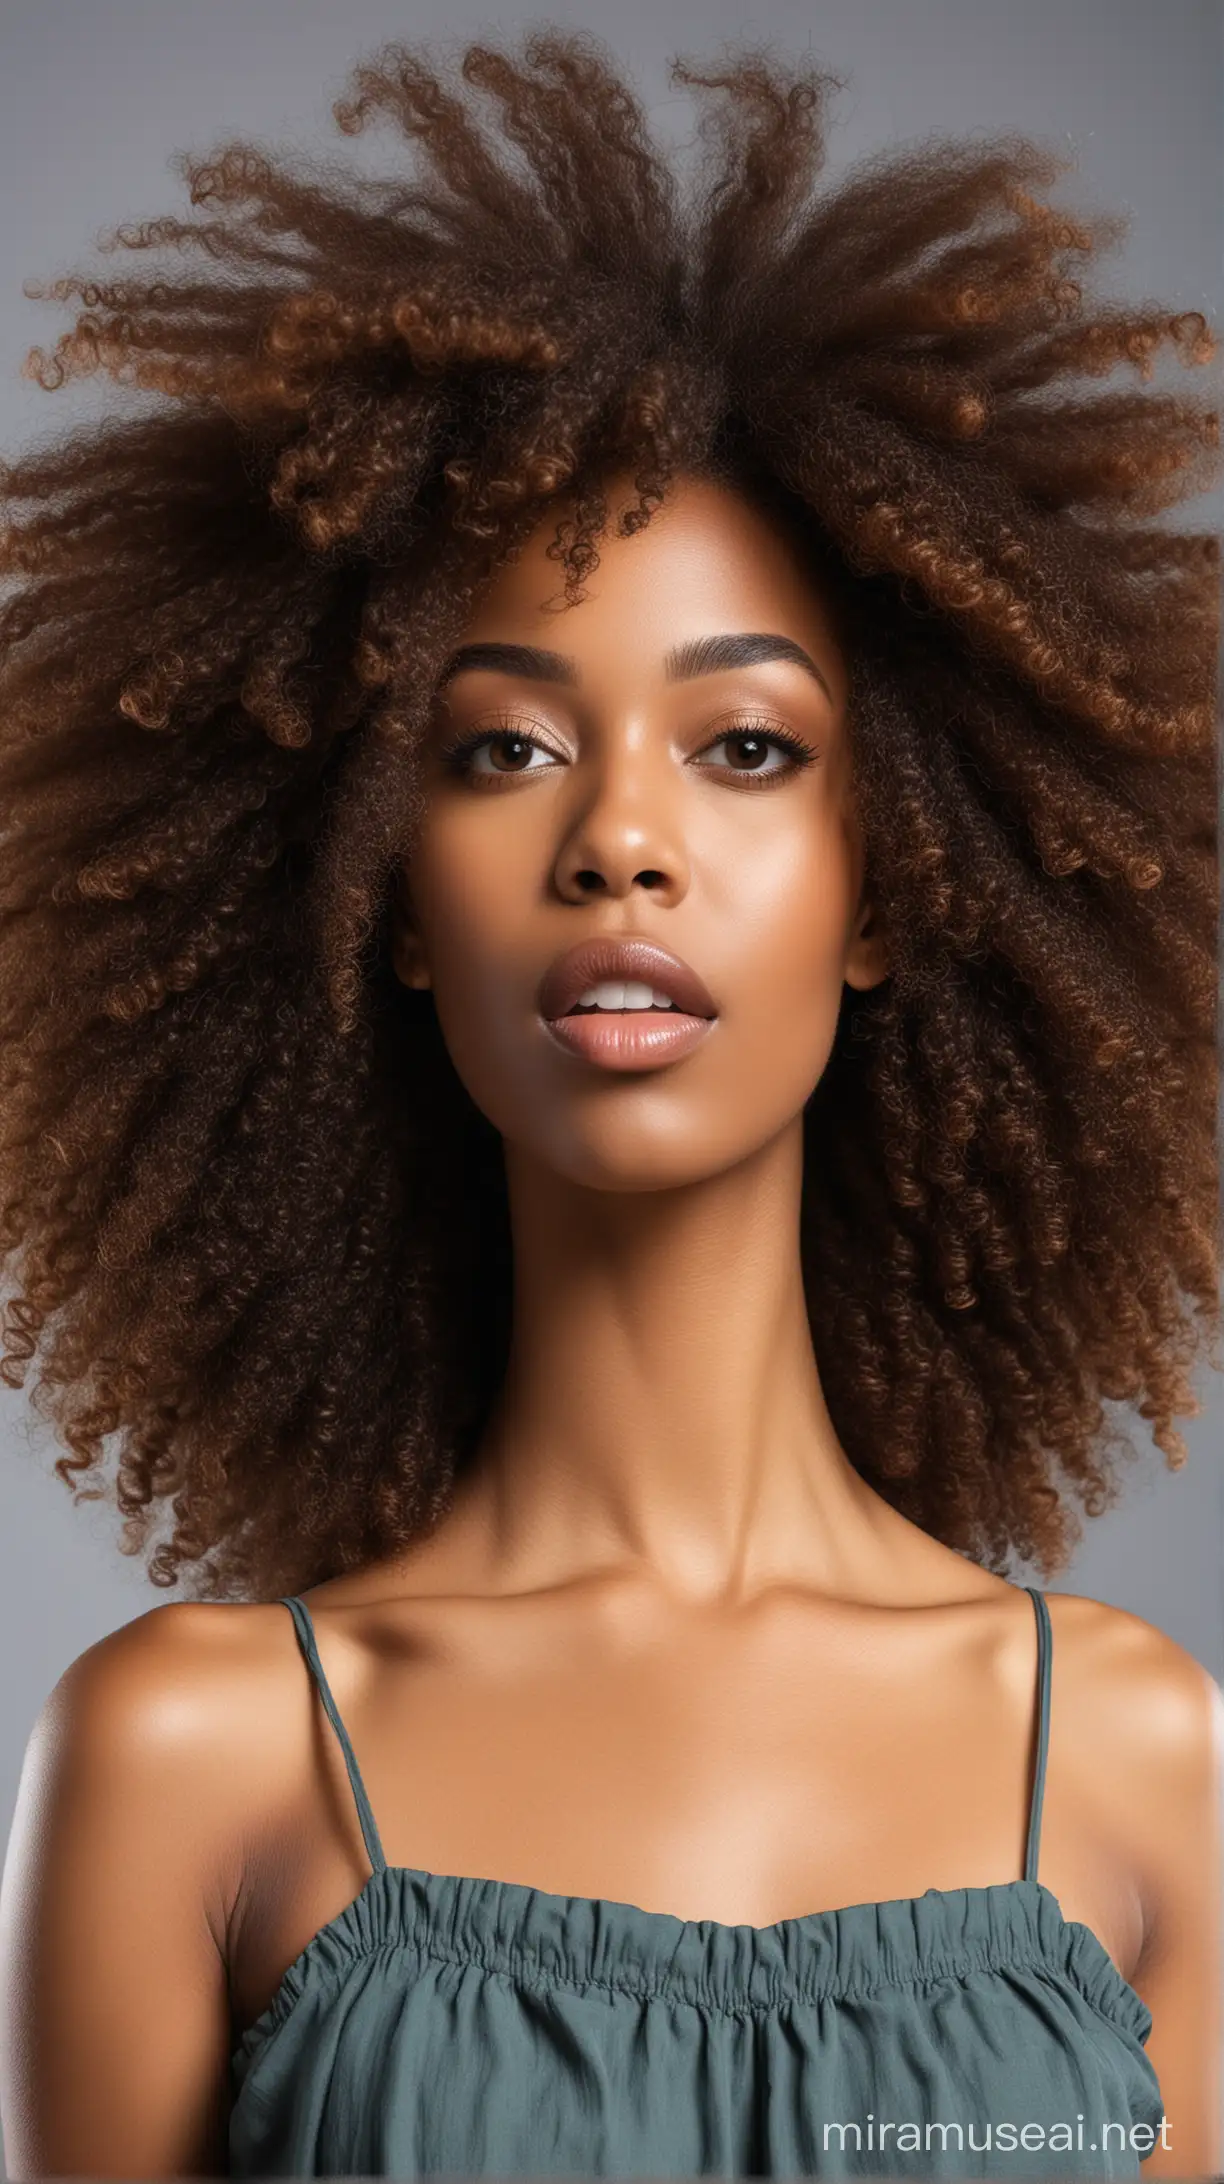 Spectacular model with beautiful and healthy Afro hair